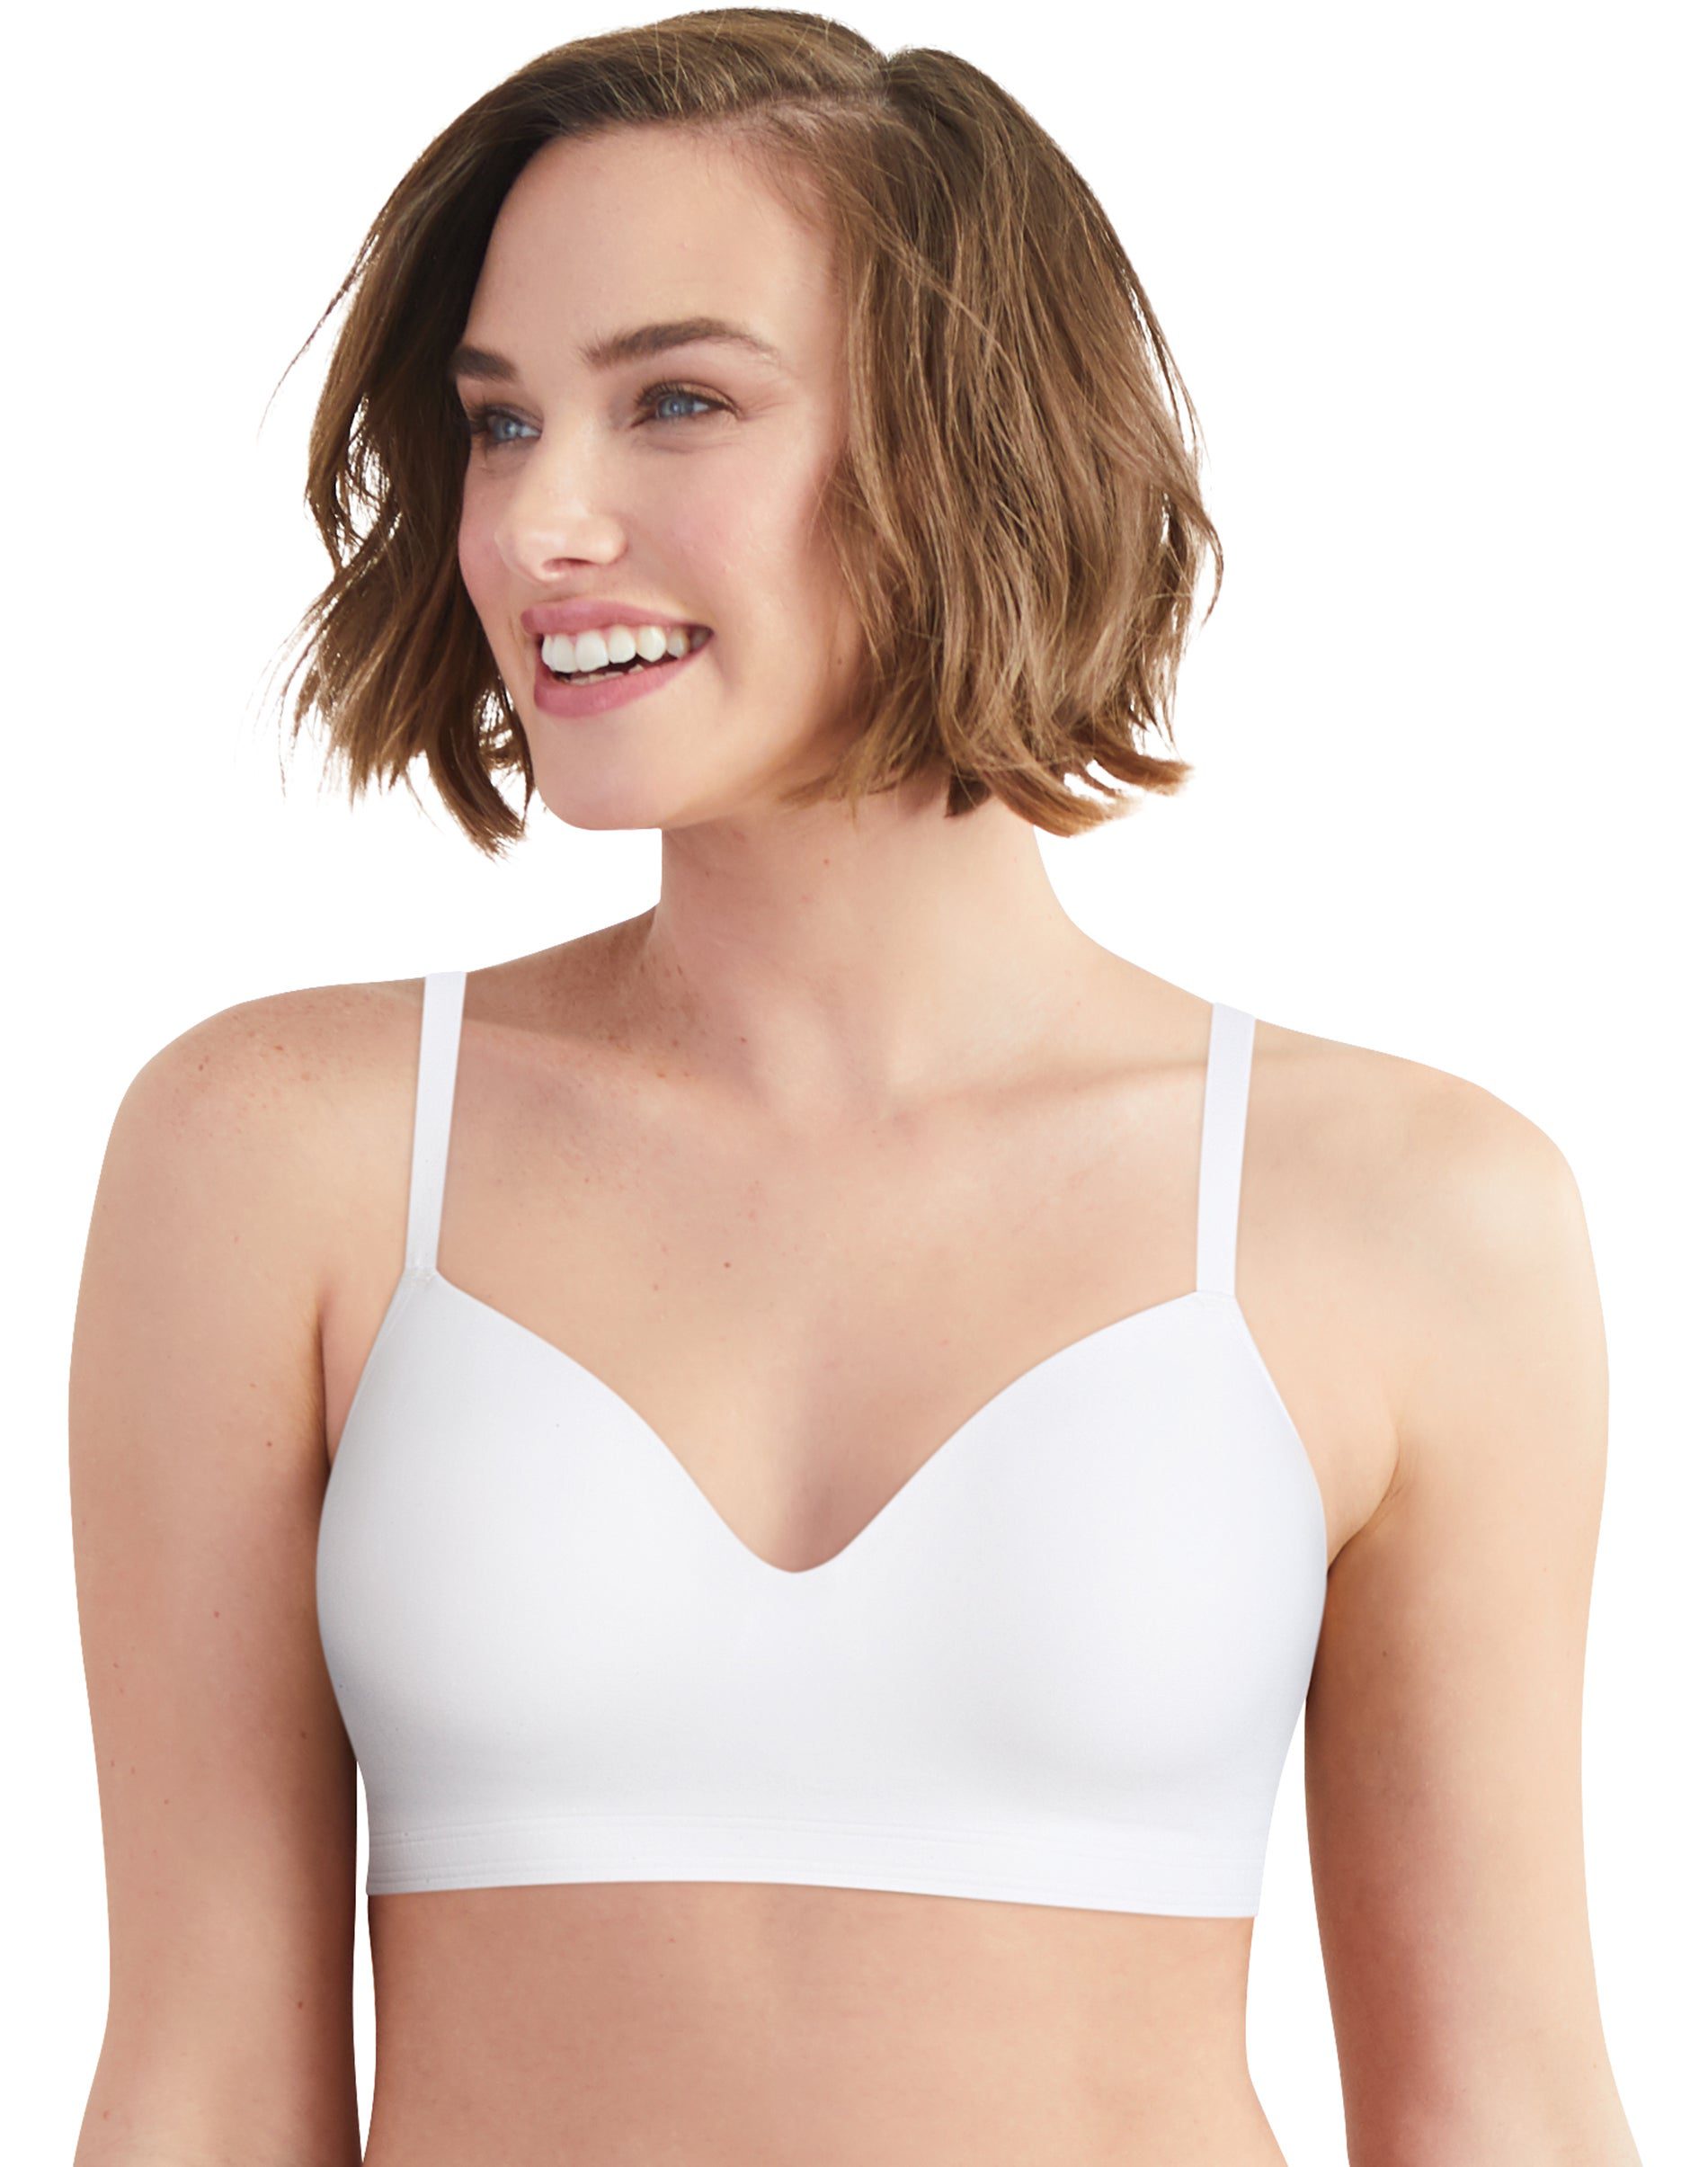 Hanes Cotton Stretch Comfort Flex Fit and Wirefree Bra 2-Pack